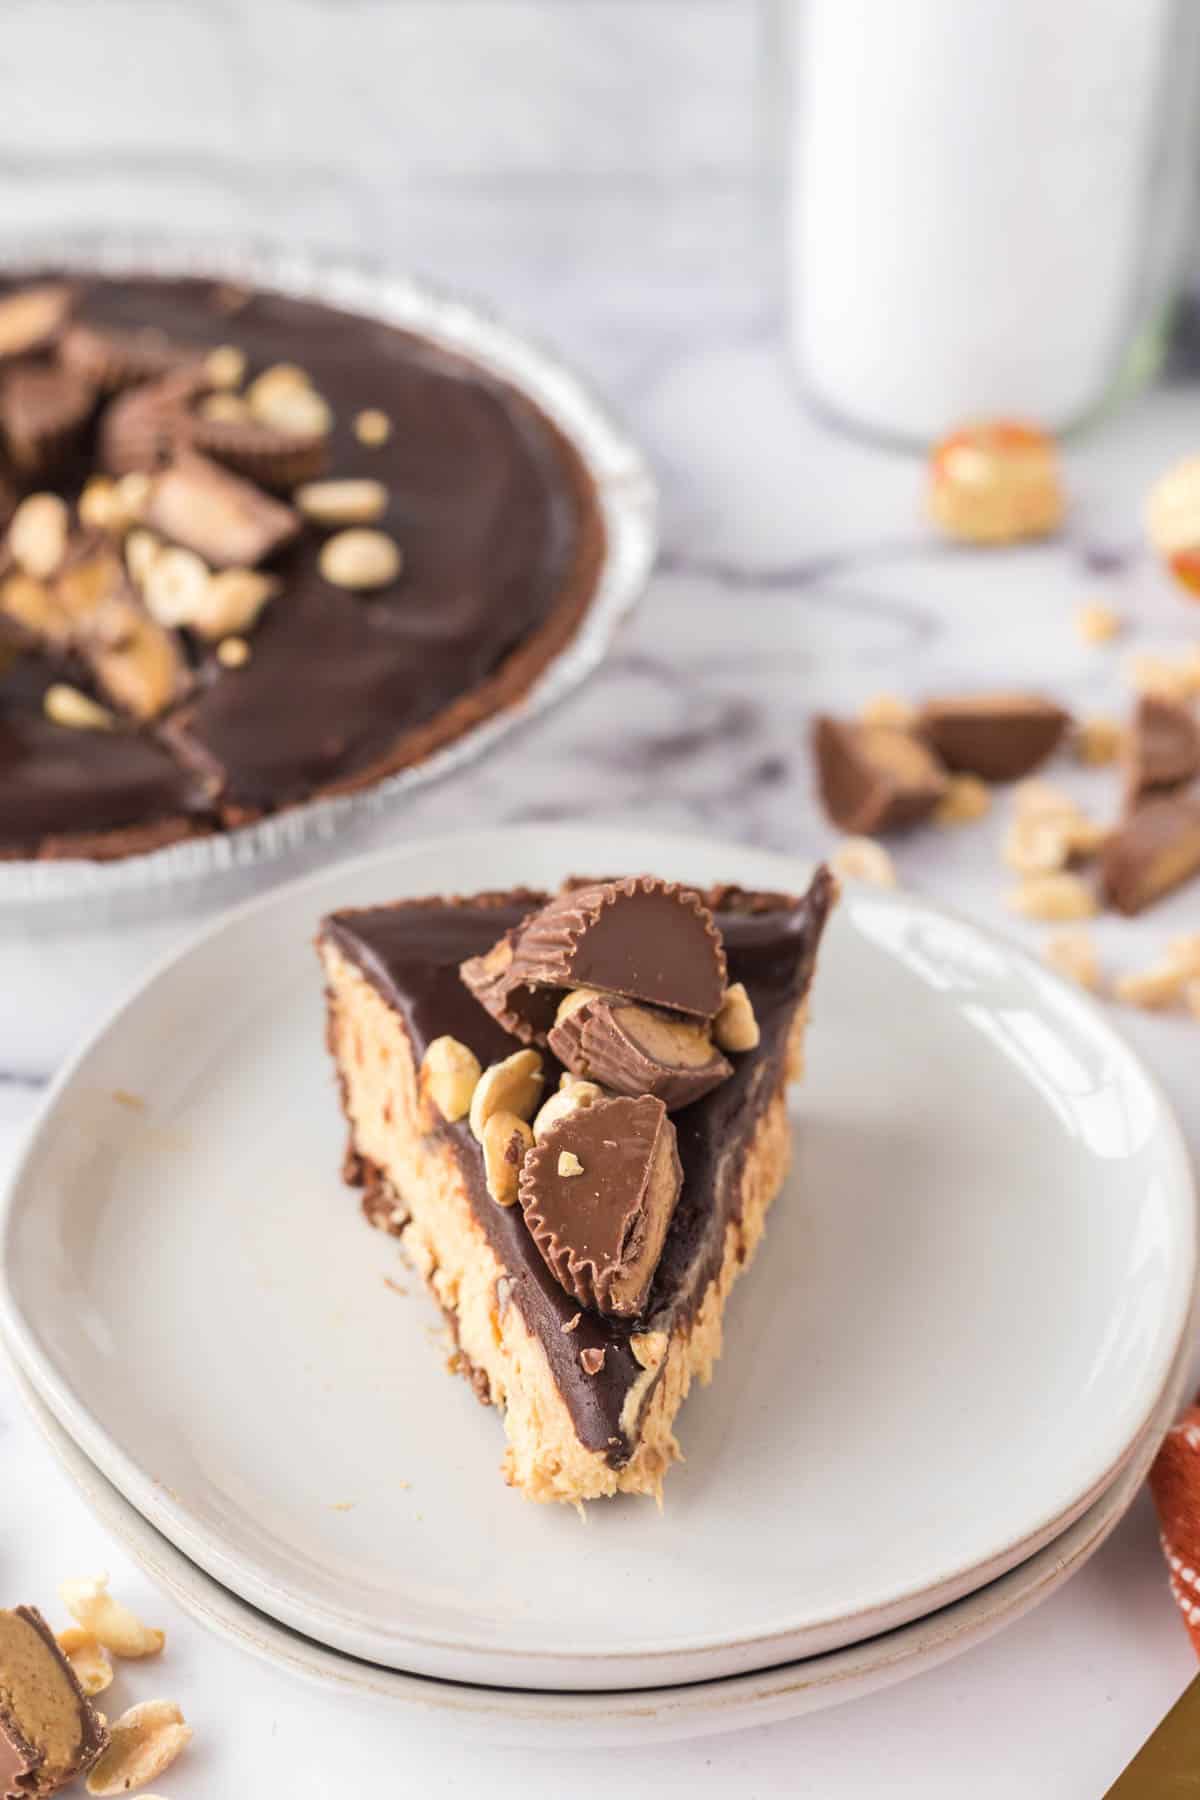 Chocolate Peanut Butter Pie is an easy no bake dessert recipe using a store bought chocolate pie crust with a creamy peanut butter cream cheese filling all topped with chocolate ganache, chopped Reese's peanut butter cups and peanuts.